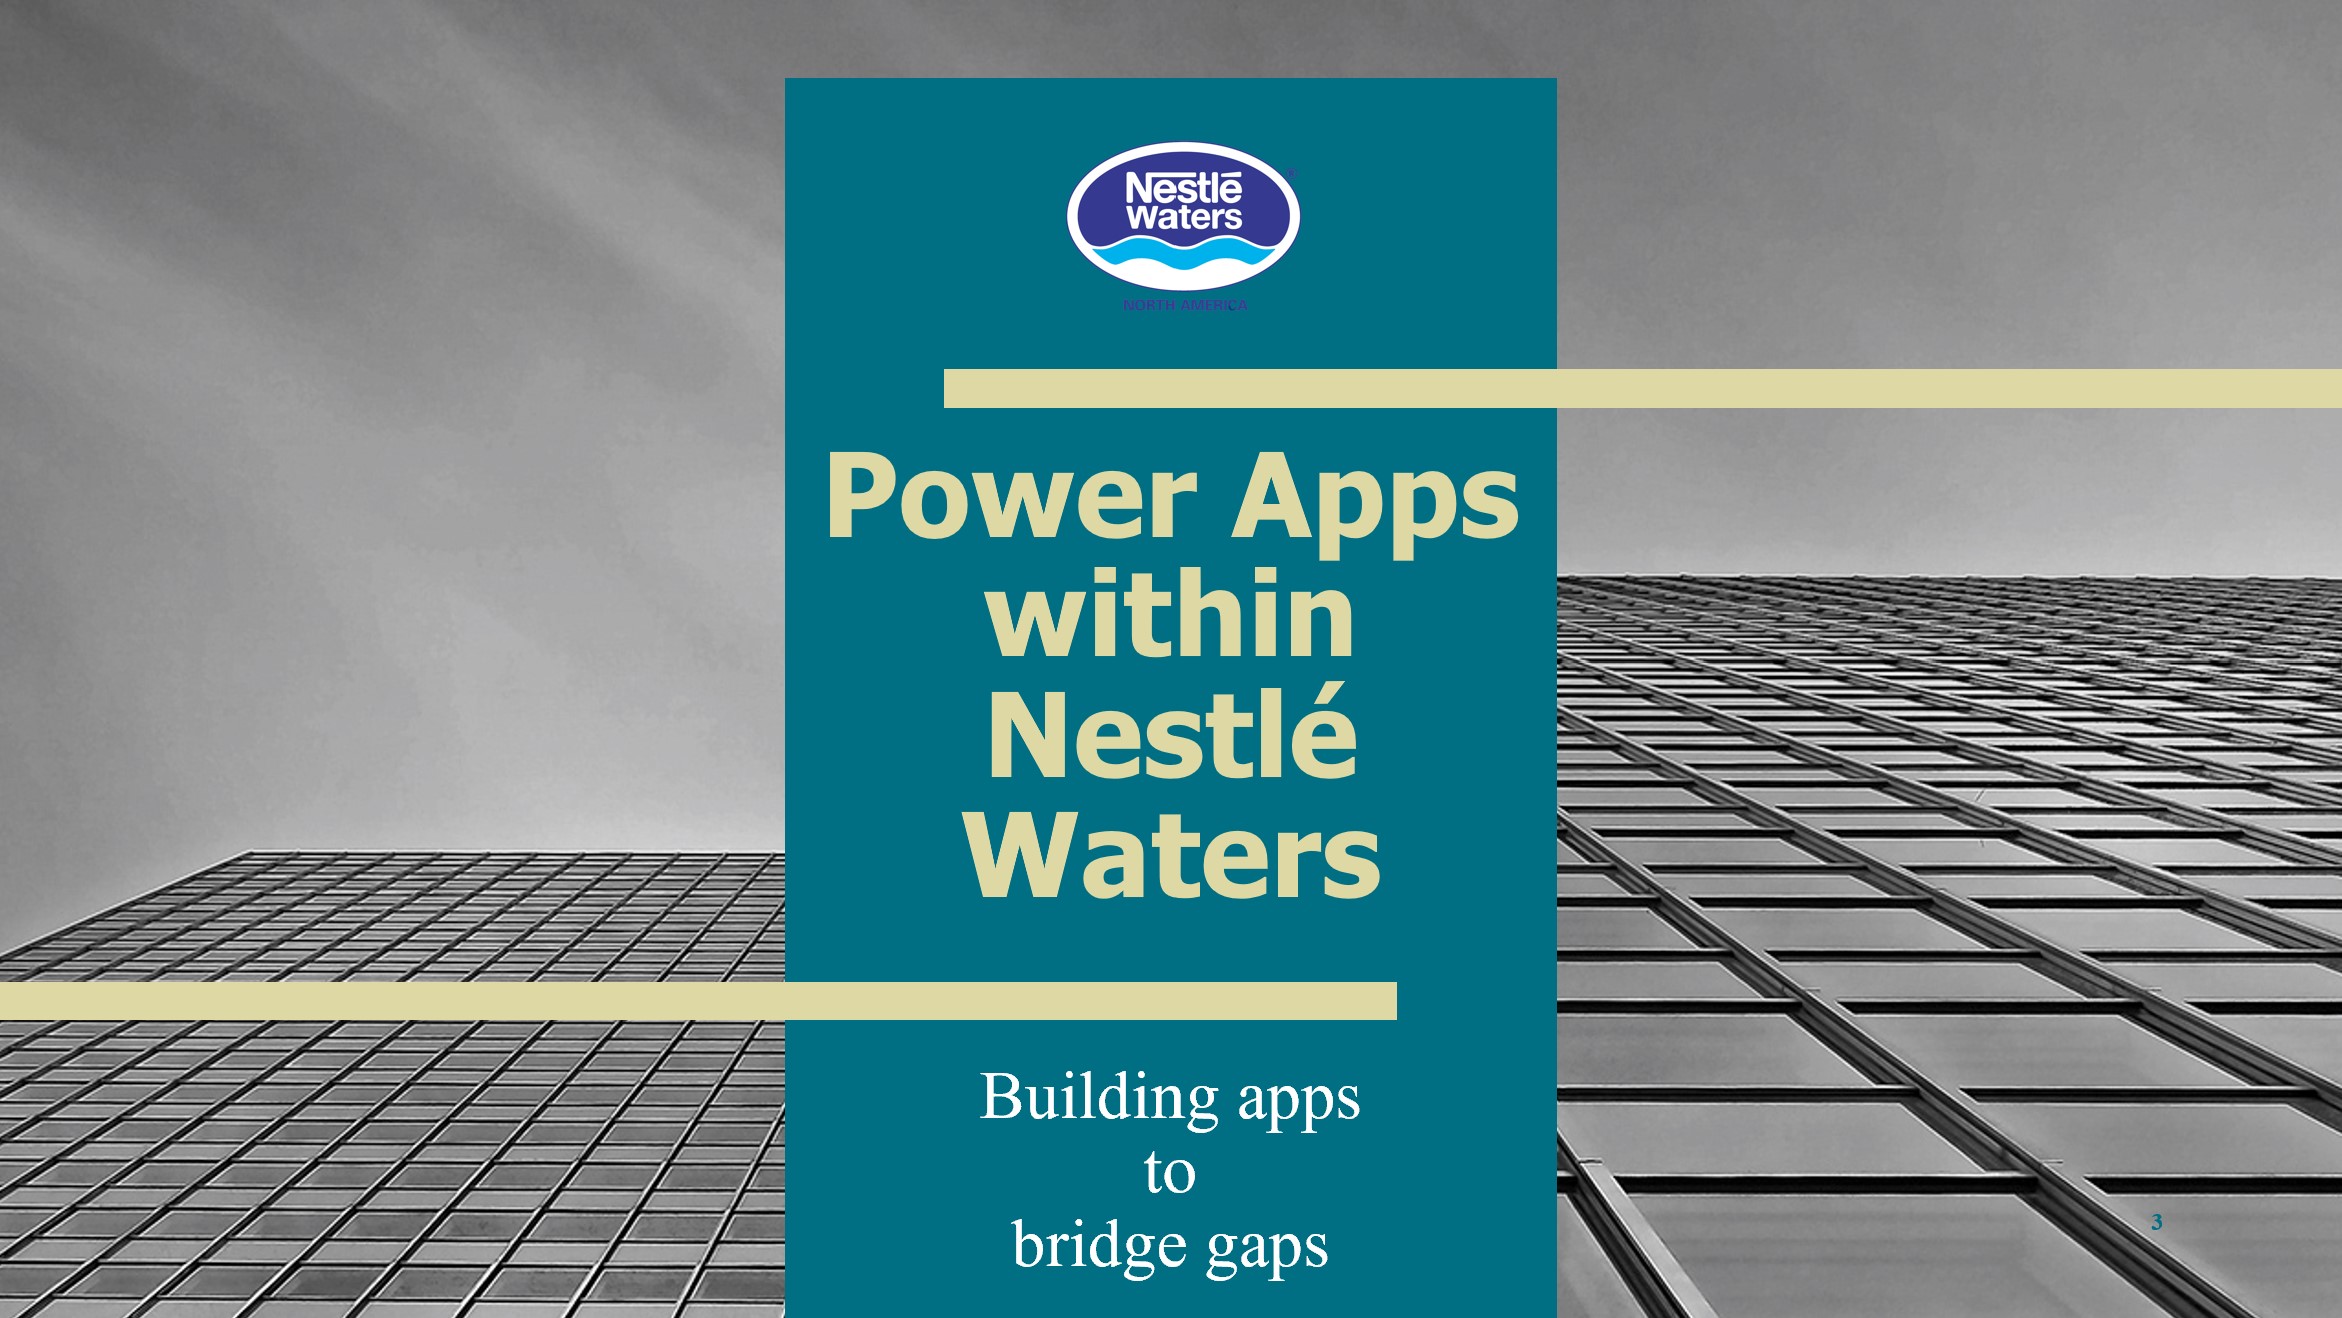 Nestlé Waters uses Power Apps to digitize operations at their manufacturing facility